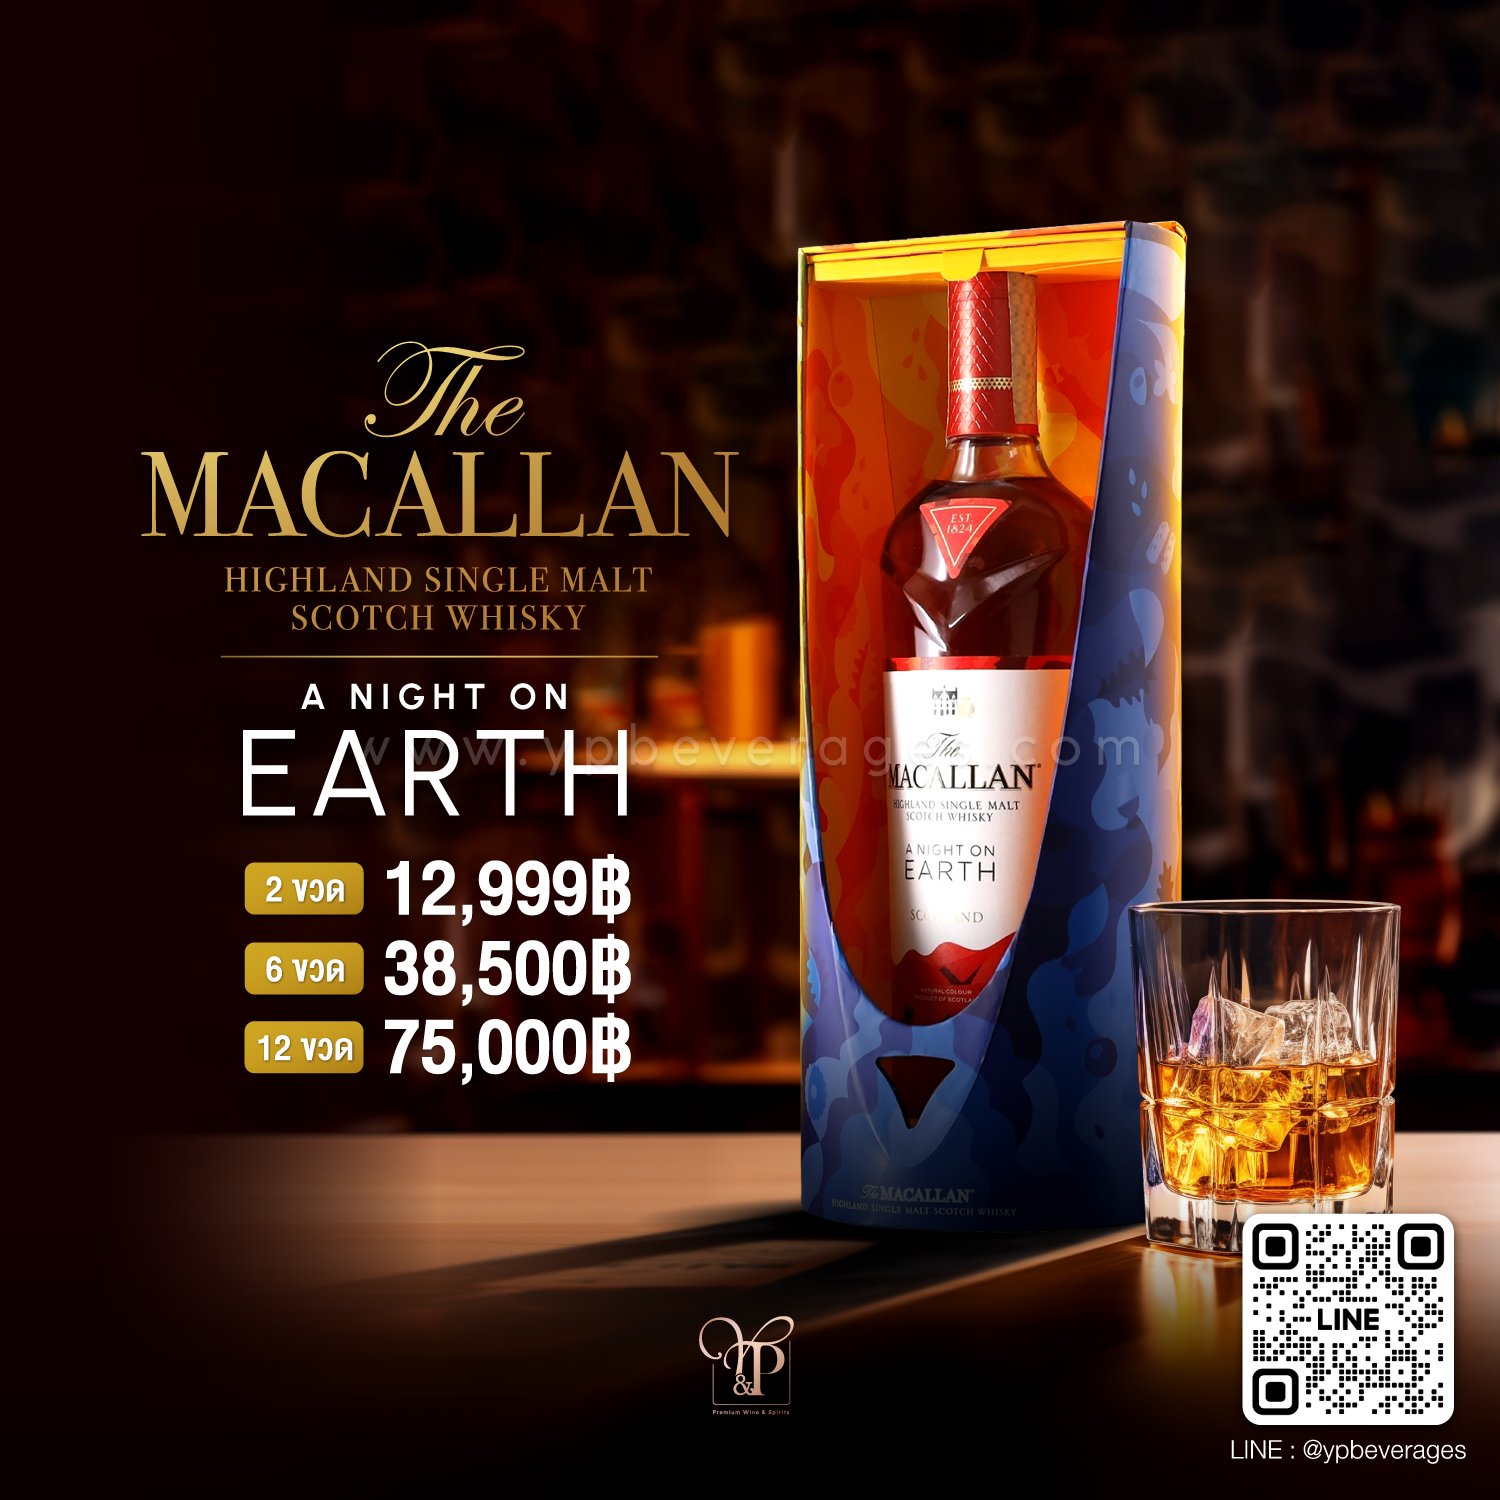 THE MACALLAN A NIGHT ON EARTH 🌏 LIMITED EDITION โปรโมชั่น 2 ขวด 12999